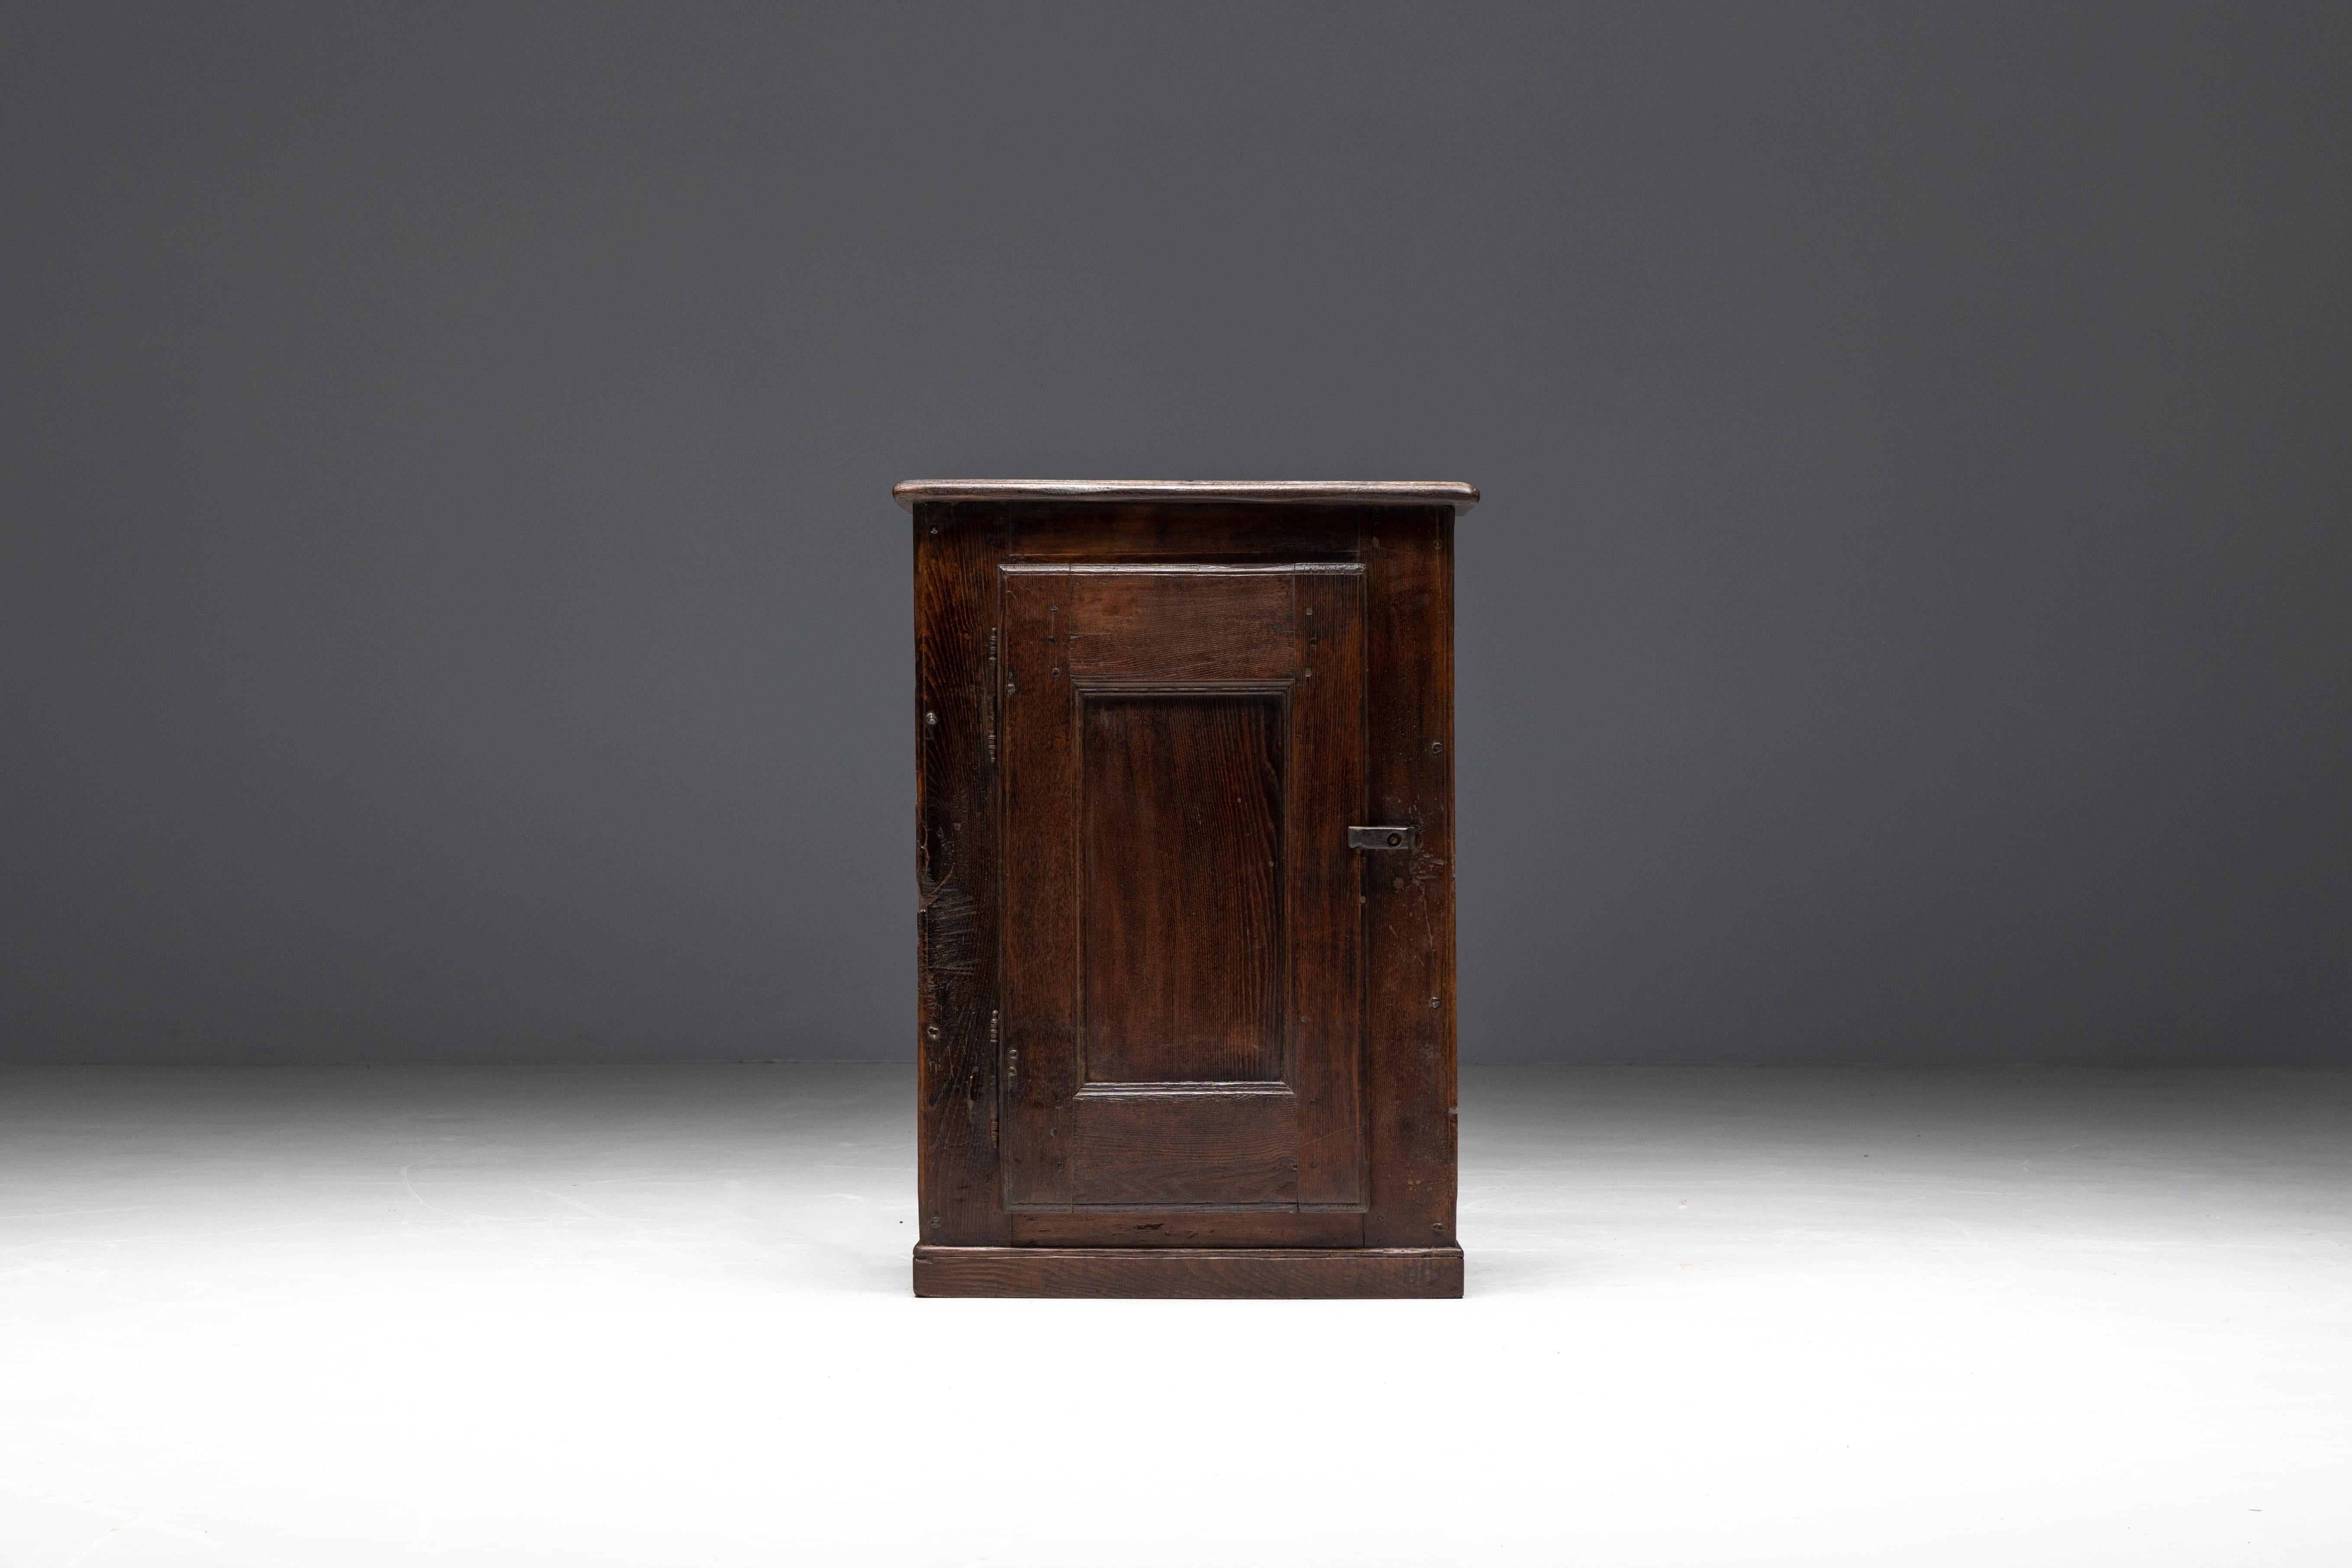 19th-century rustic cupboard handcrafted of solid wood and hailing from the Cévennes region. This piece, formerly used as a 